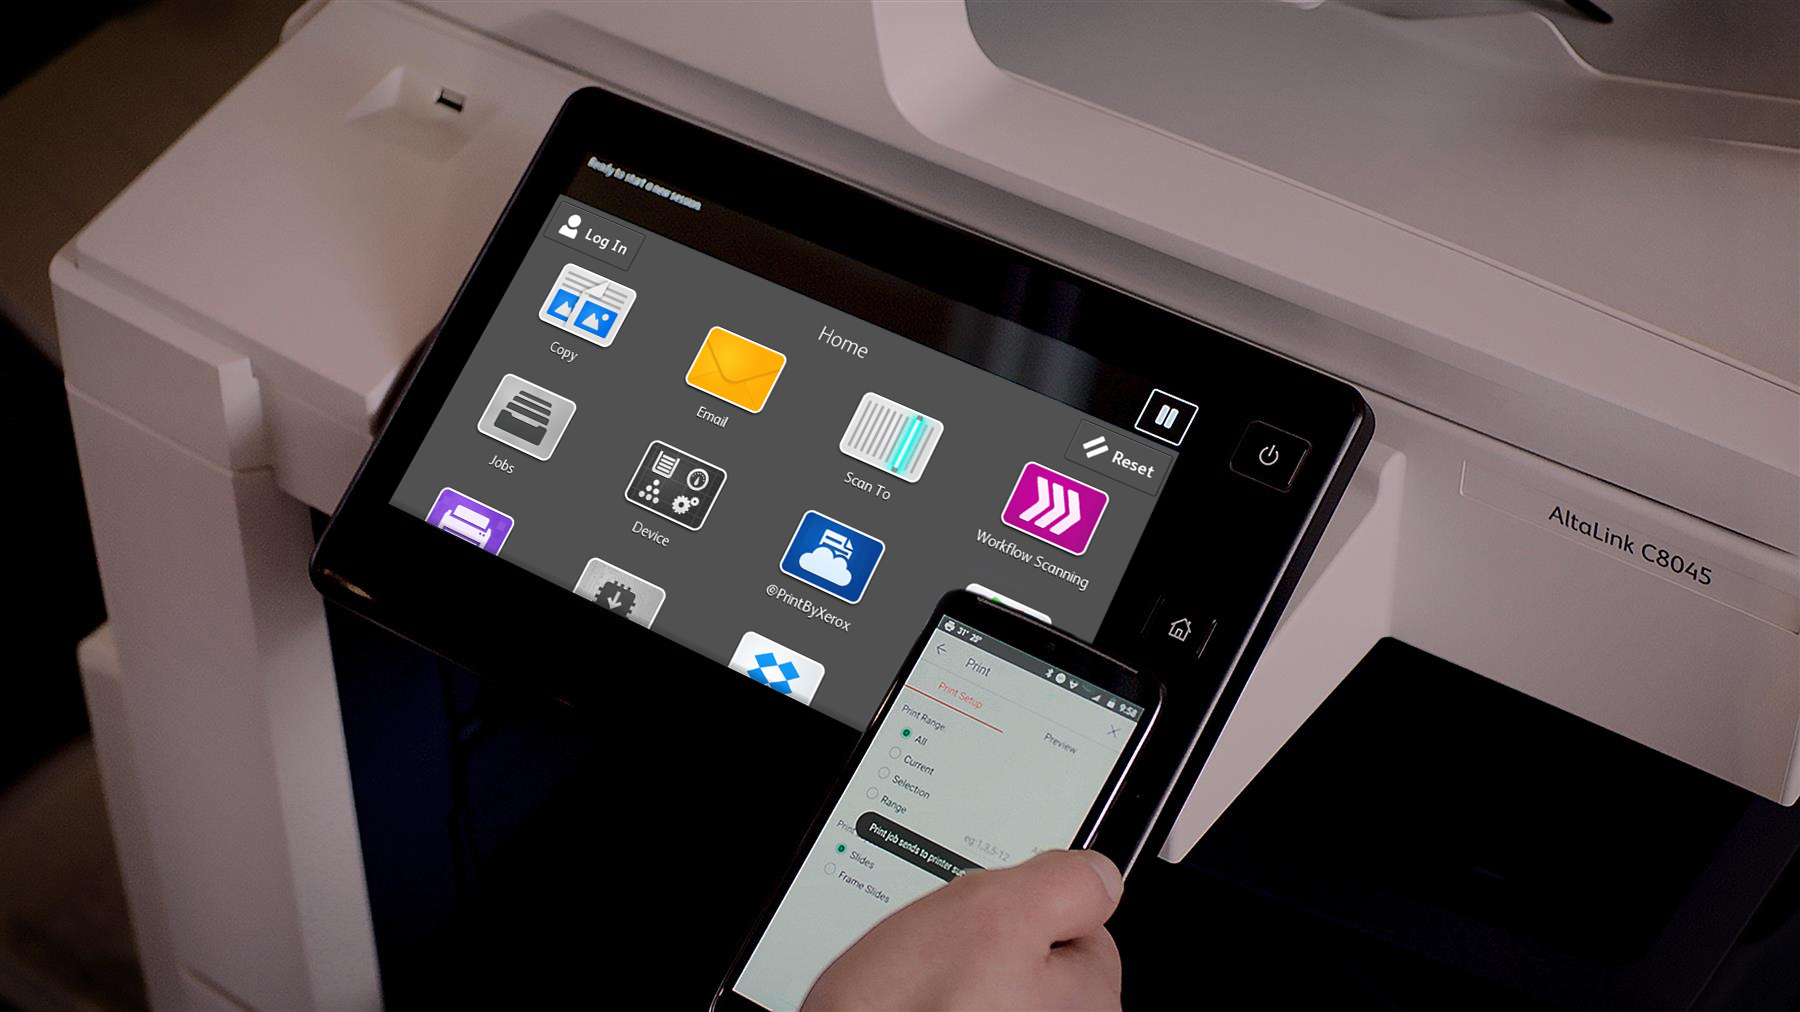 With a new tablet-like user experience, Xerox AltaLink Multifunction Printers make completing daily tasks faster and easier with a customizable home screen.